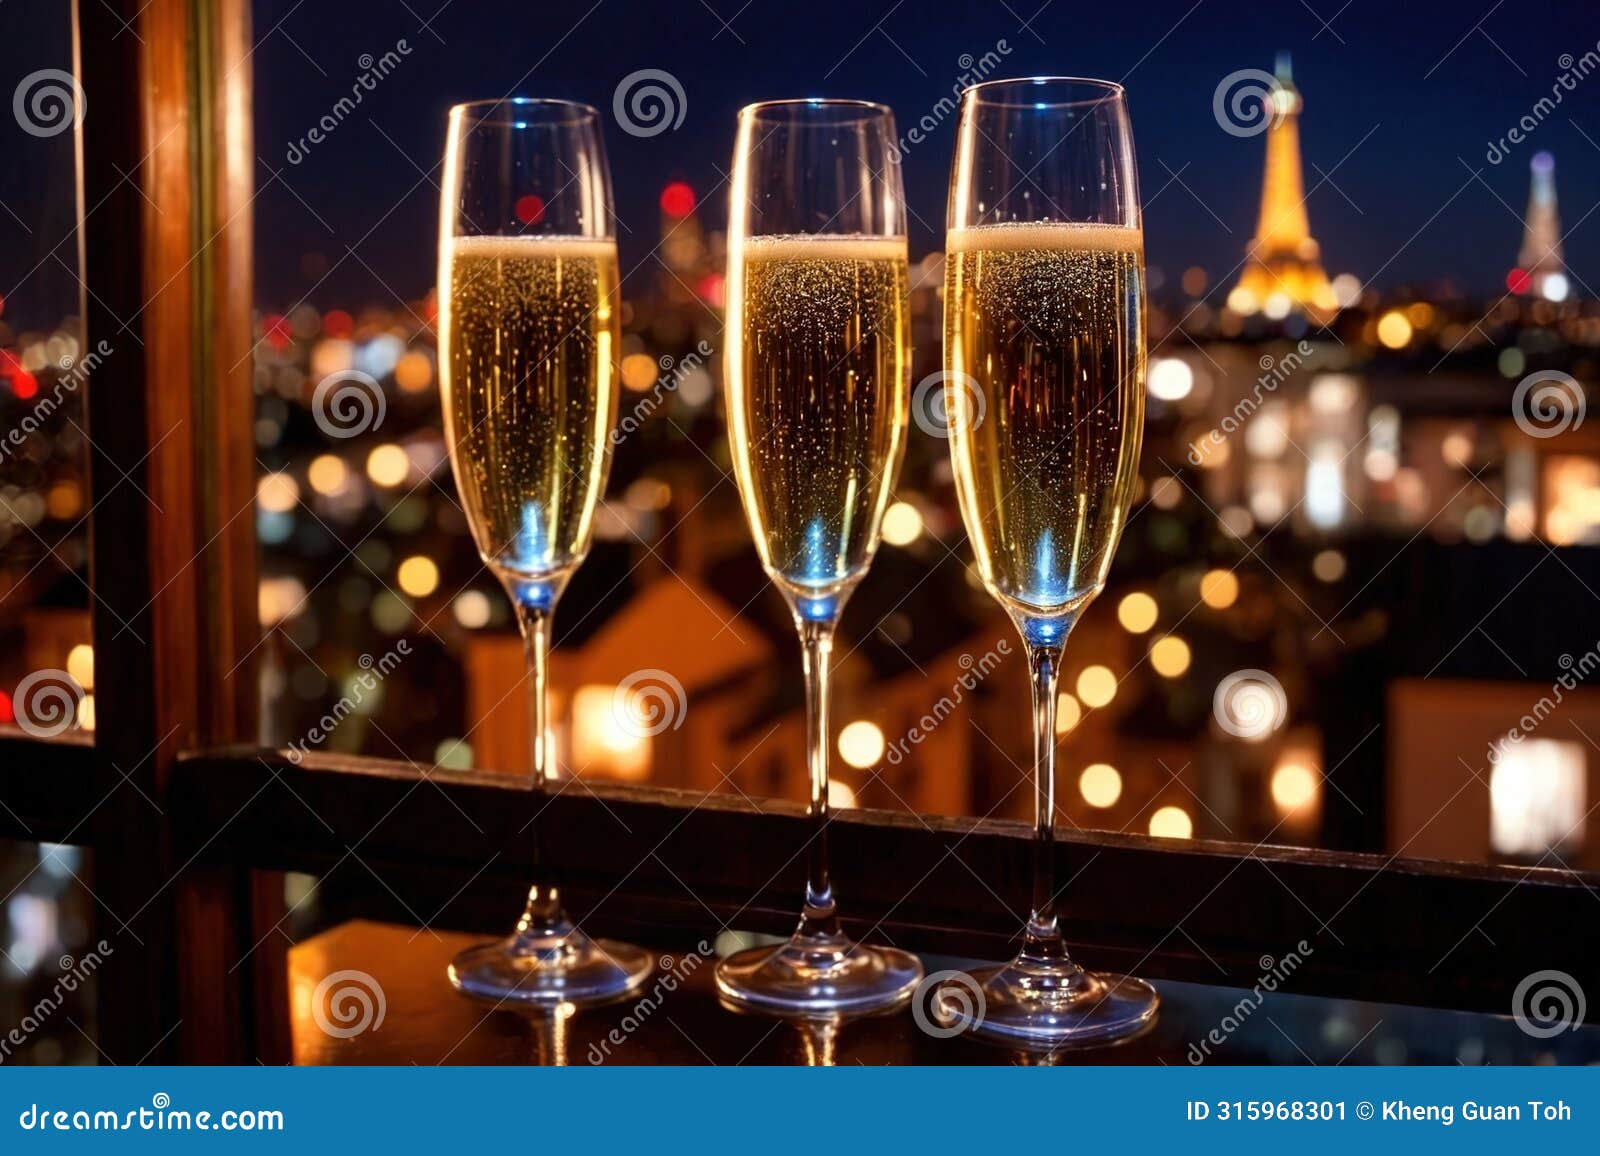 champagne glasses flutes on balcony overlooking city, festive special occasion